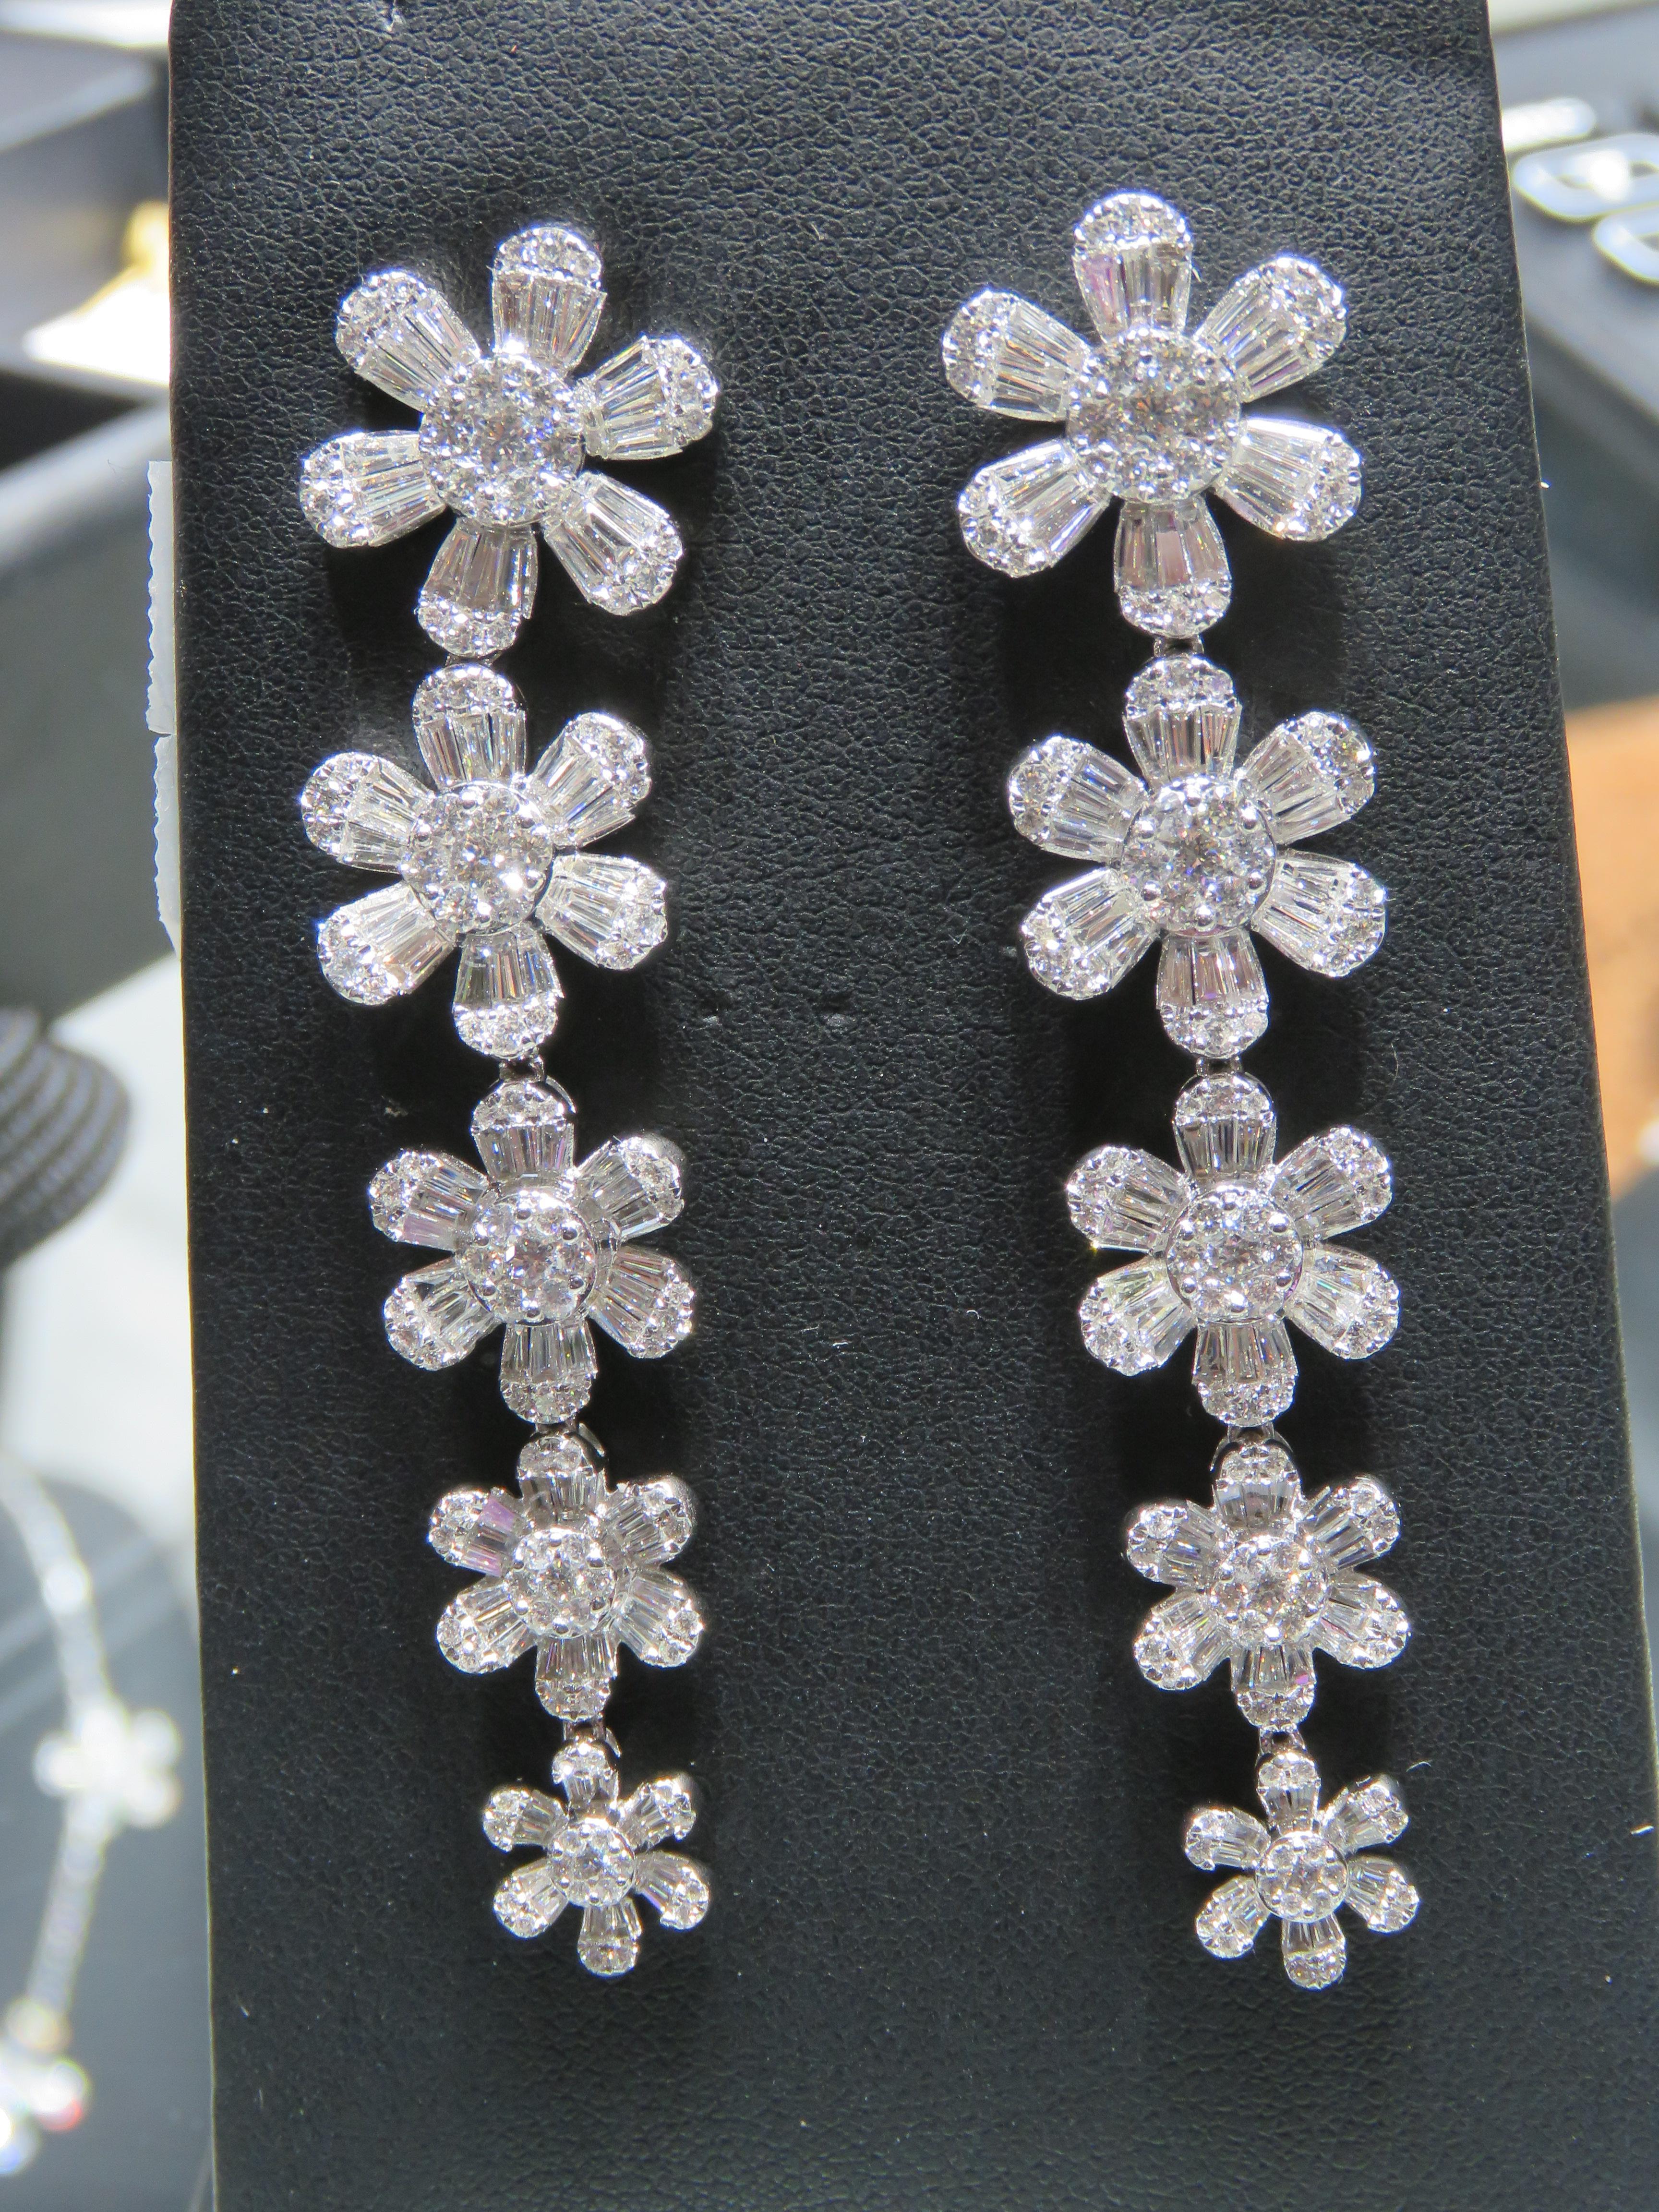 The Following Item we are offering is this Rare Important Radiant 18KT Gold Gorgeous Glittering and Sparkling Diamond Dangle Earrings. Earrings Contains over 5CTS of Beautiful Fancy White Diamonds in the Form of Flowers!!! Stones are Very Clean and